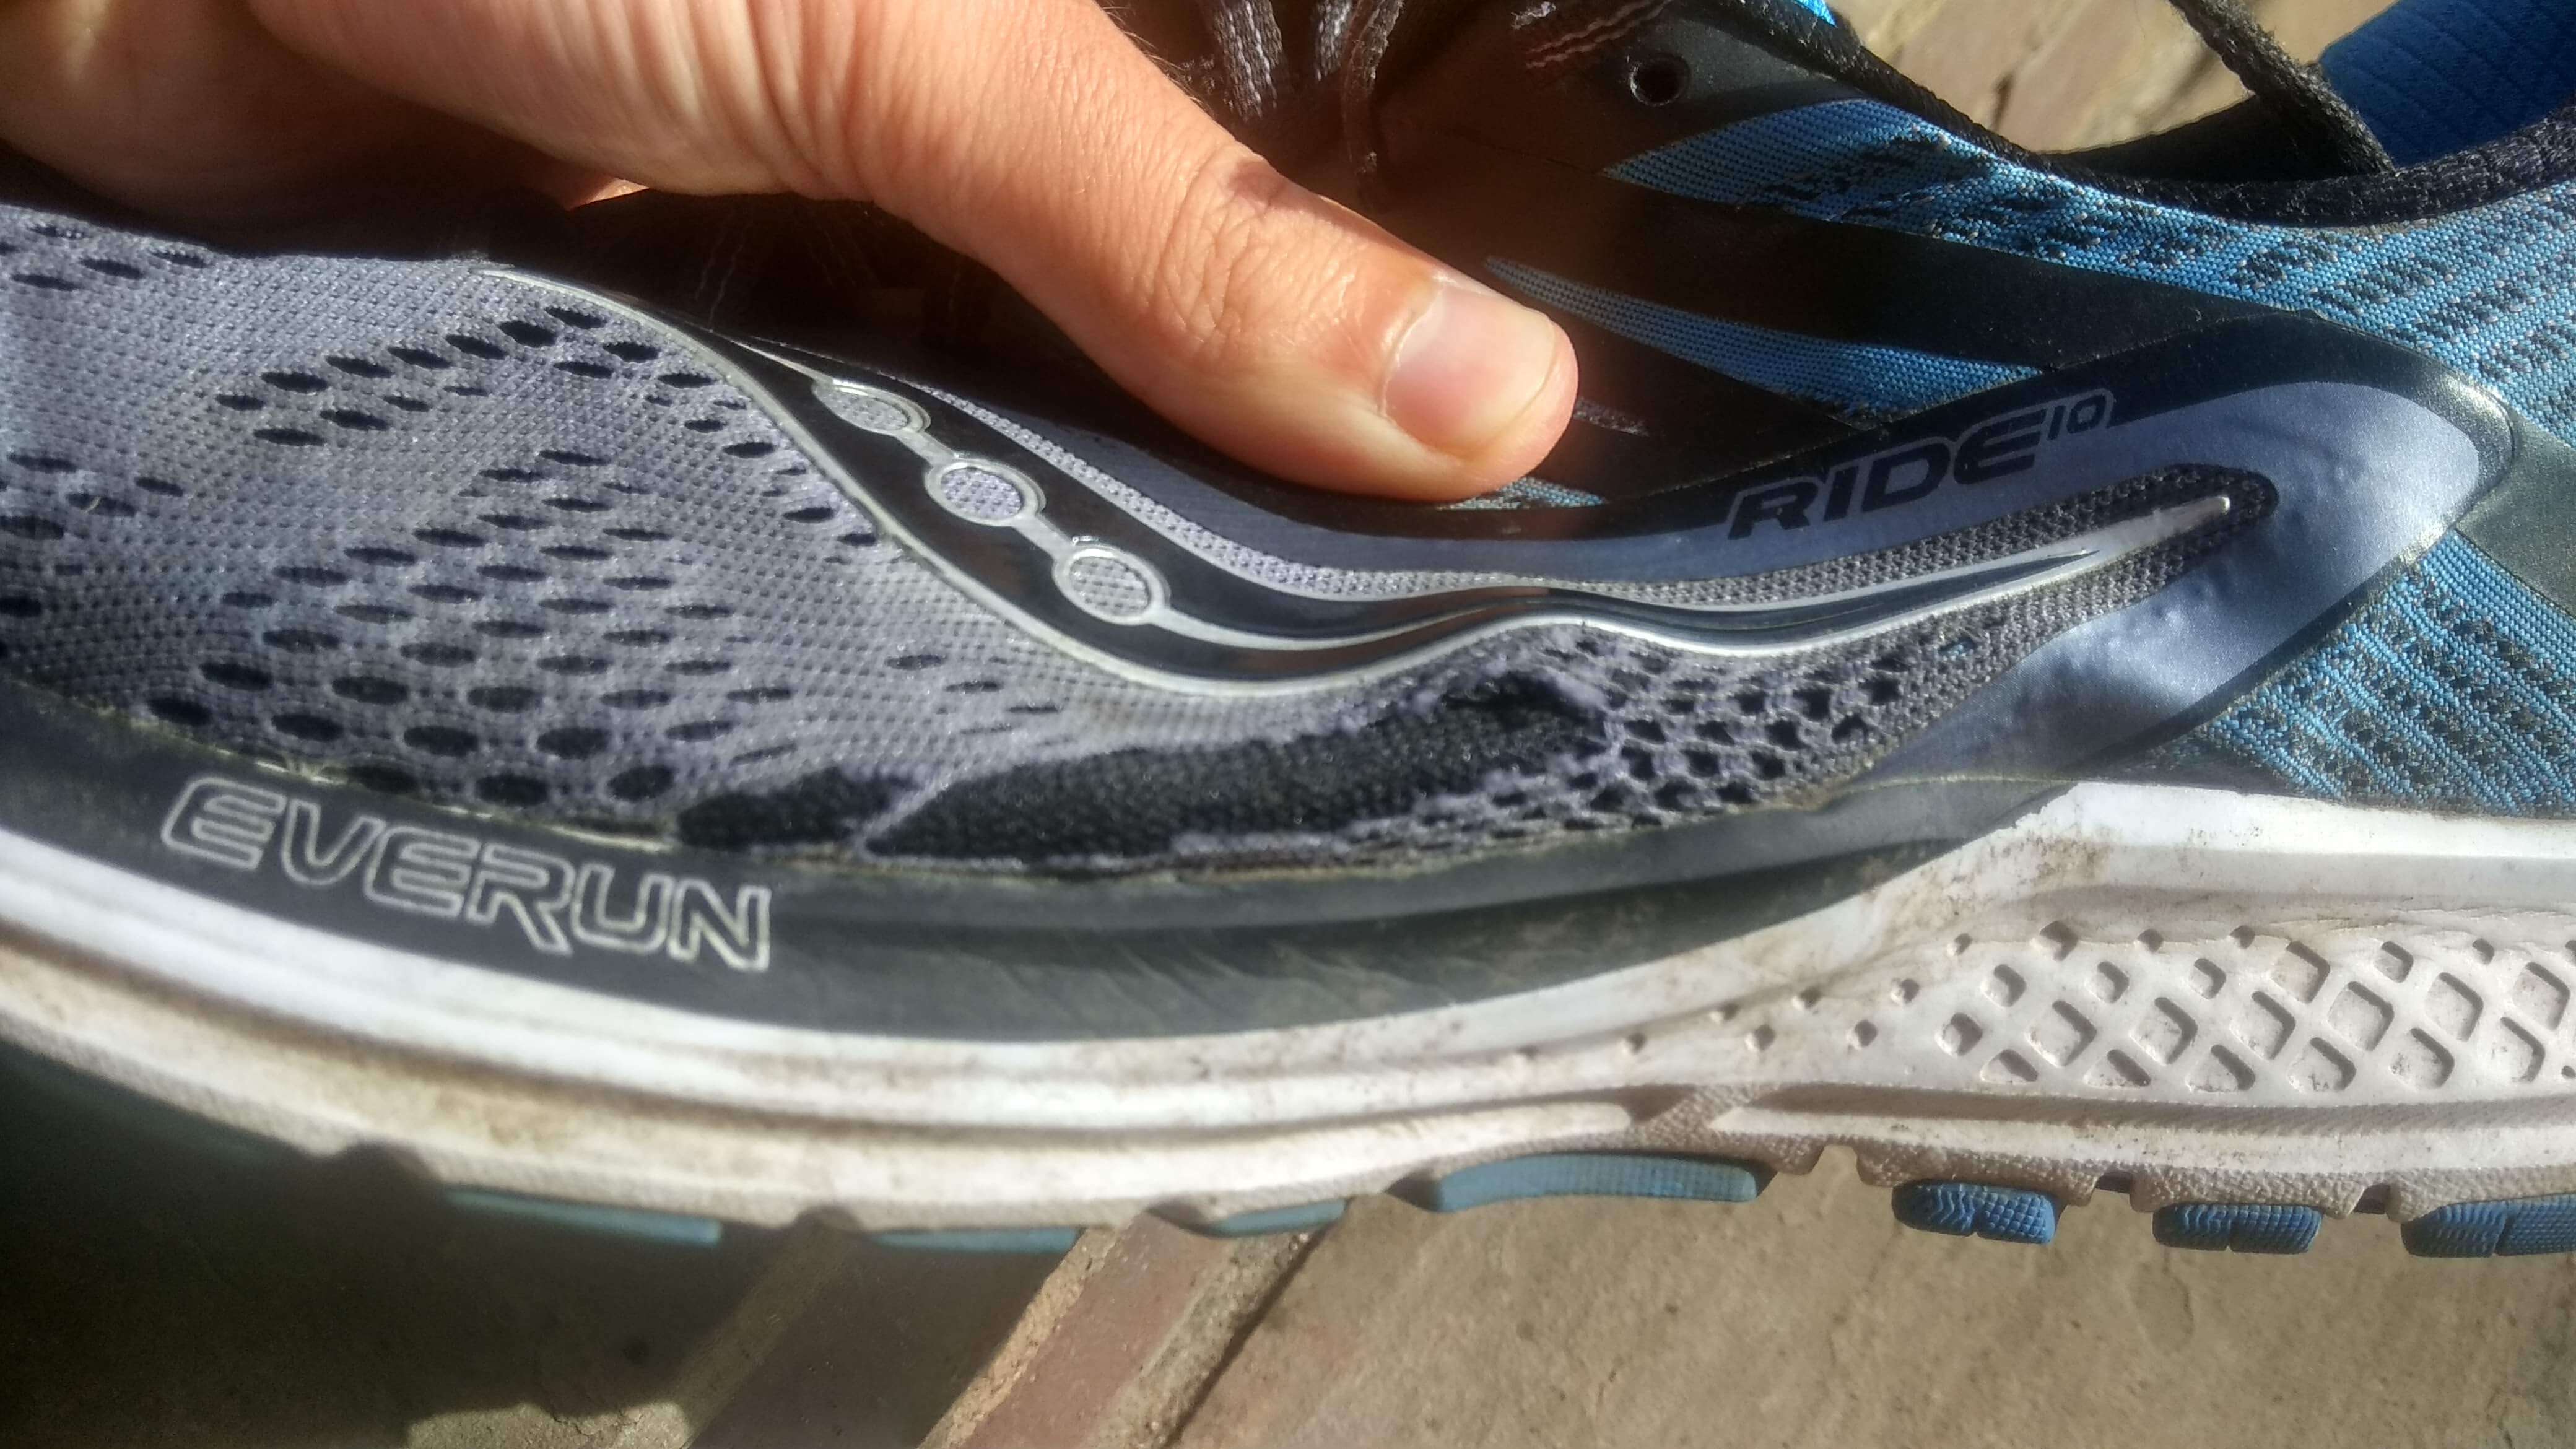 A good experience with Saucony